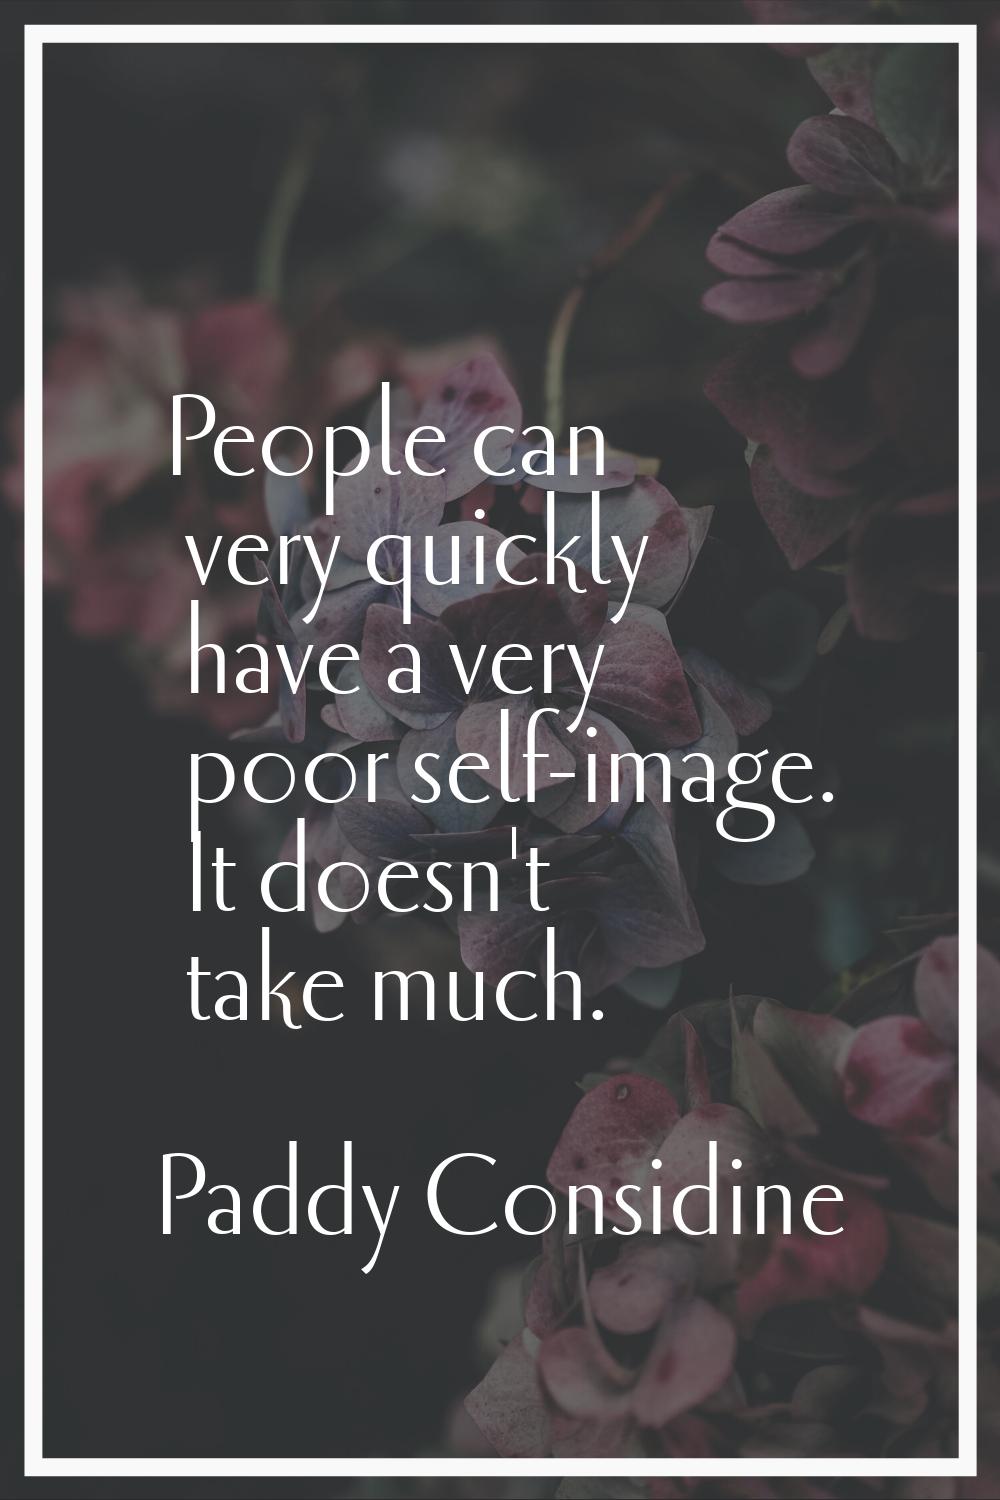 People can very quickly have a very poor self-image. It doesn't take much.